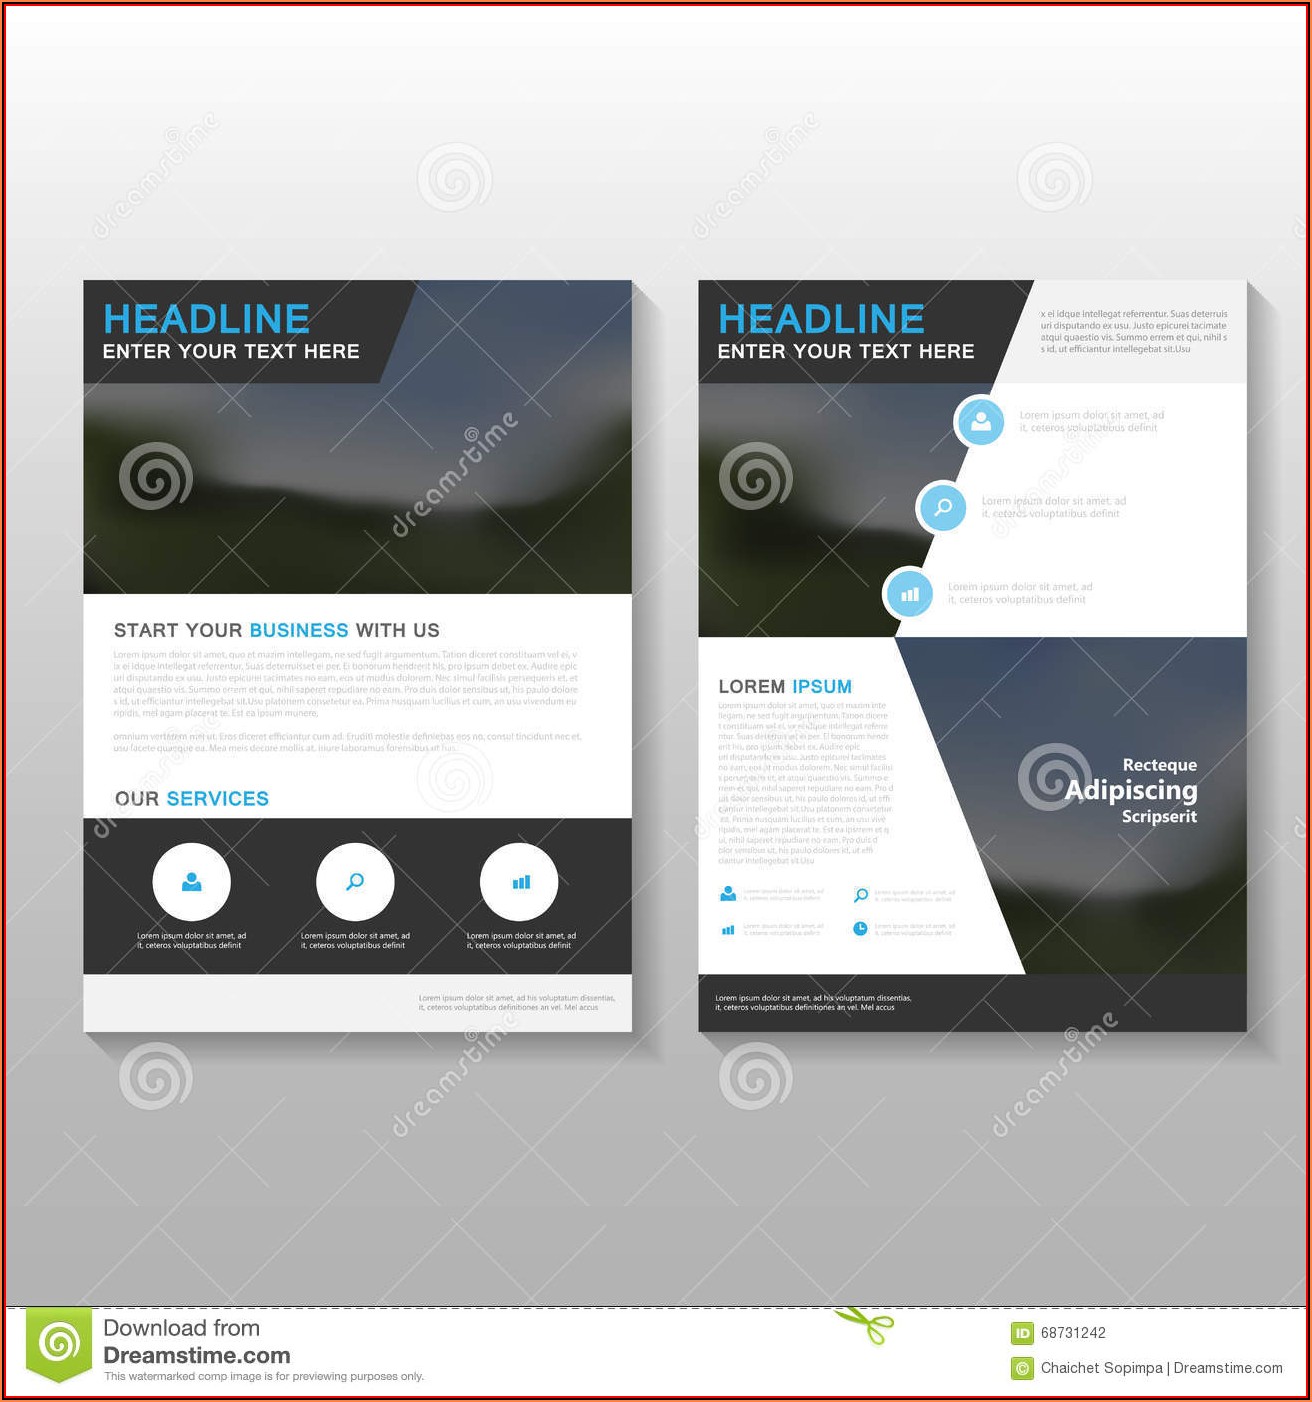 Business Proposal Template Design Free Download